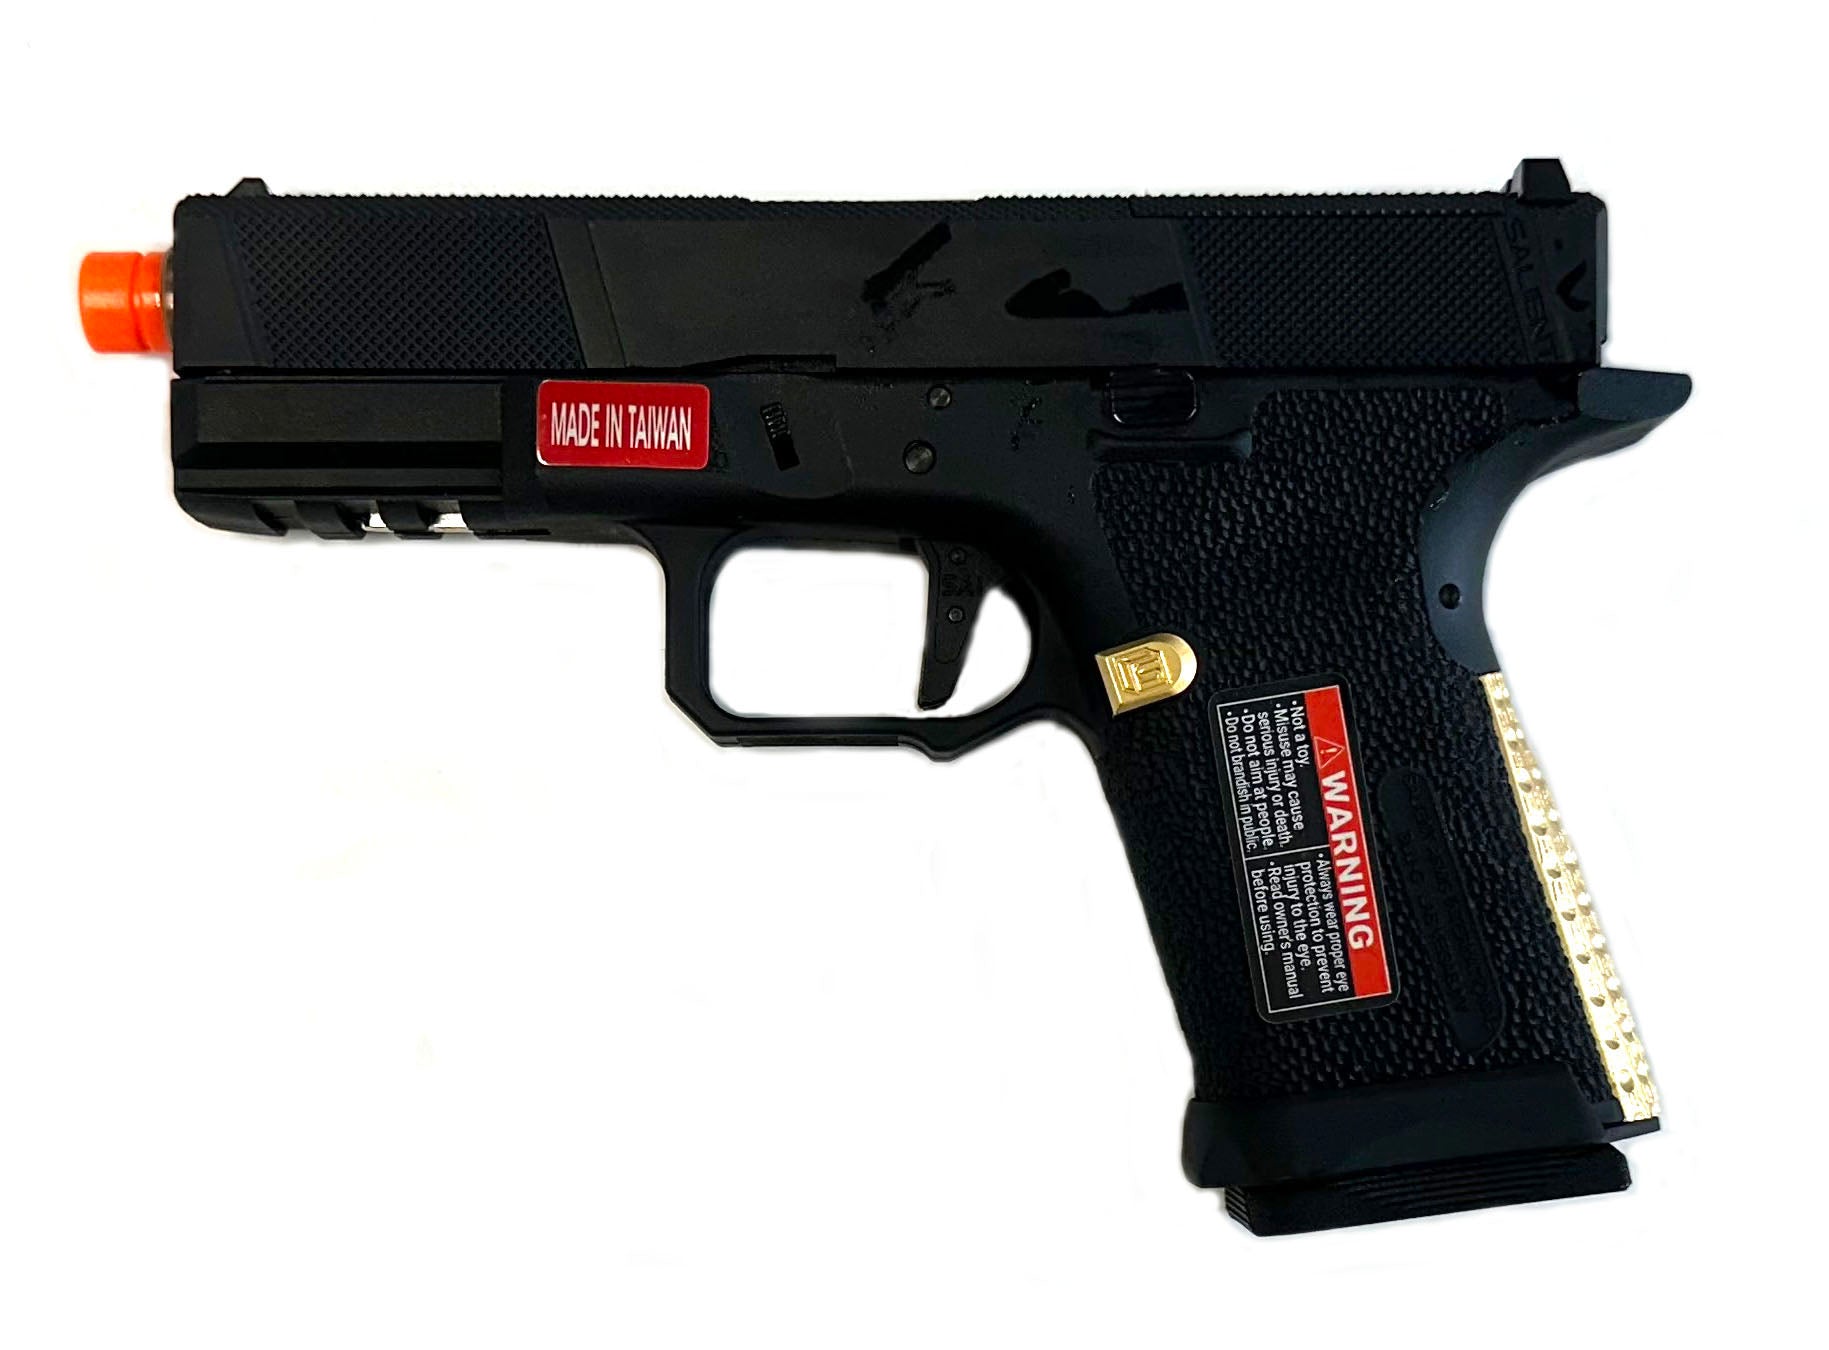 EMG Compact Tier One Utility RMR-Cut Slide GBB Airsoft Pistol - Black Rose Gold